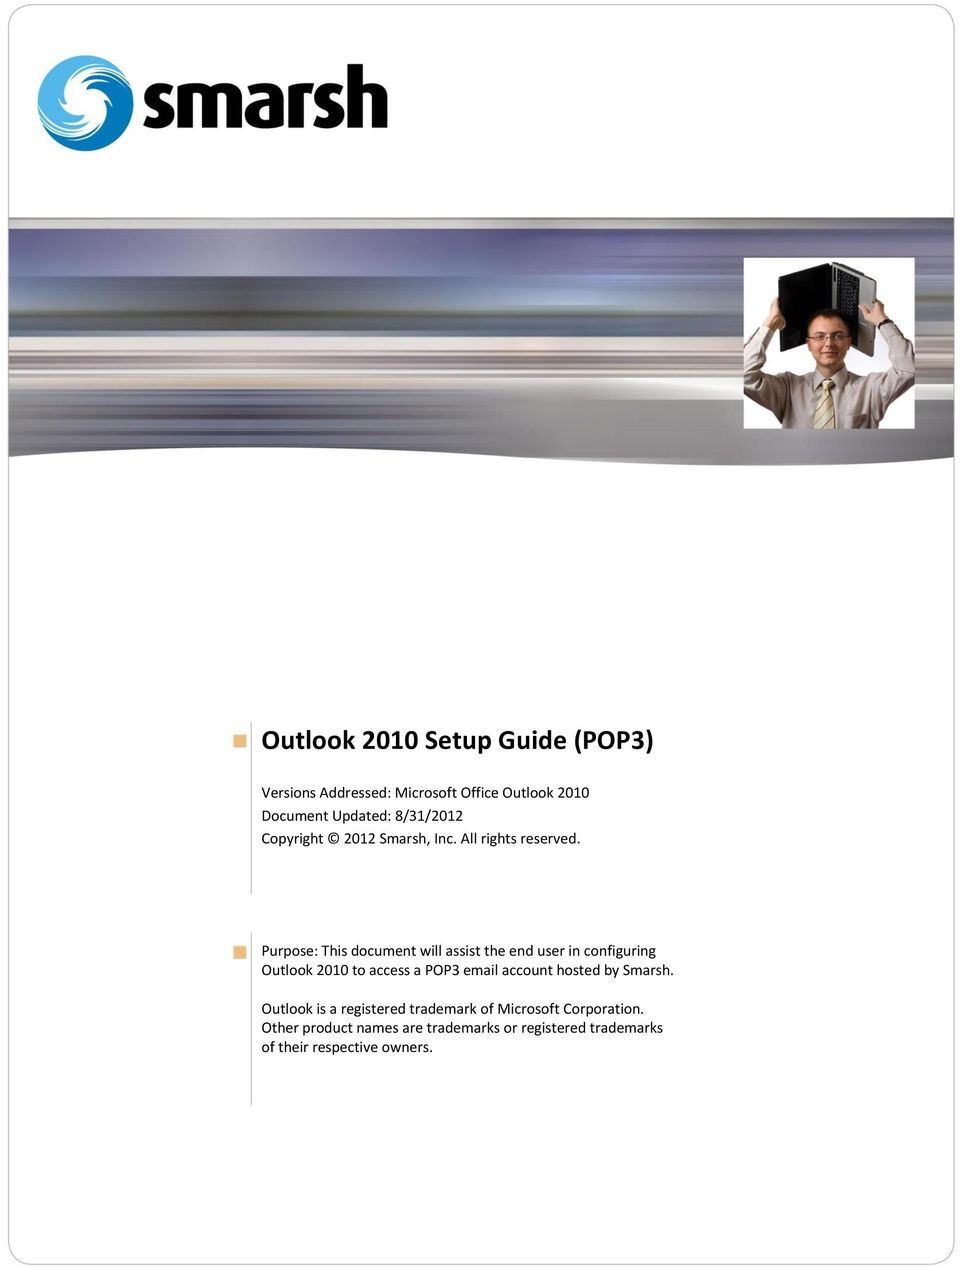 All rights Purpose: This document will assist the end user in configuring Outlook 2010 to access